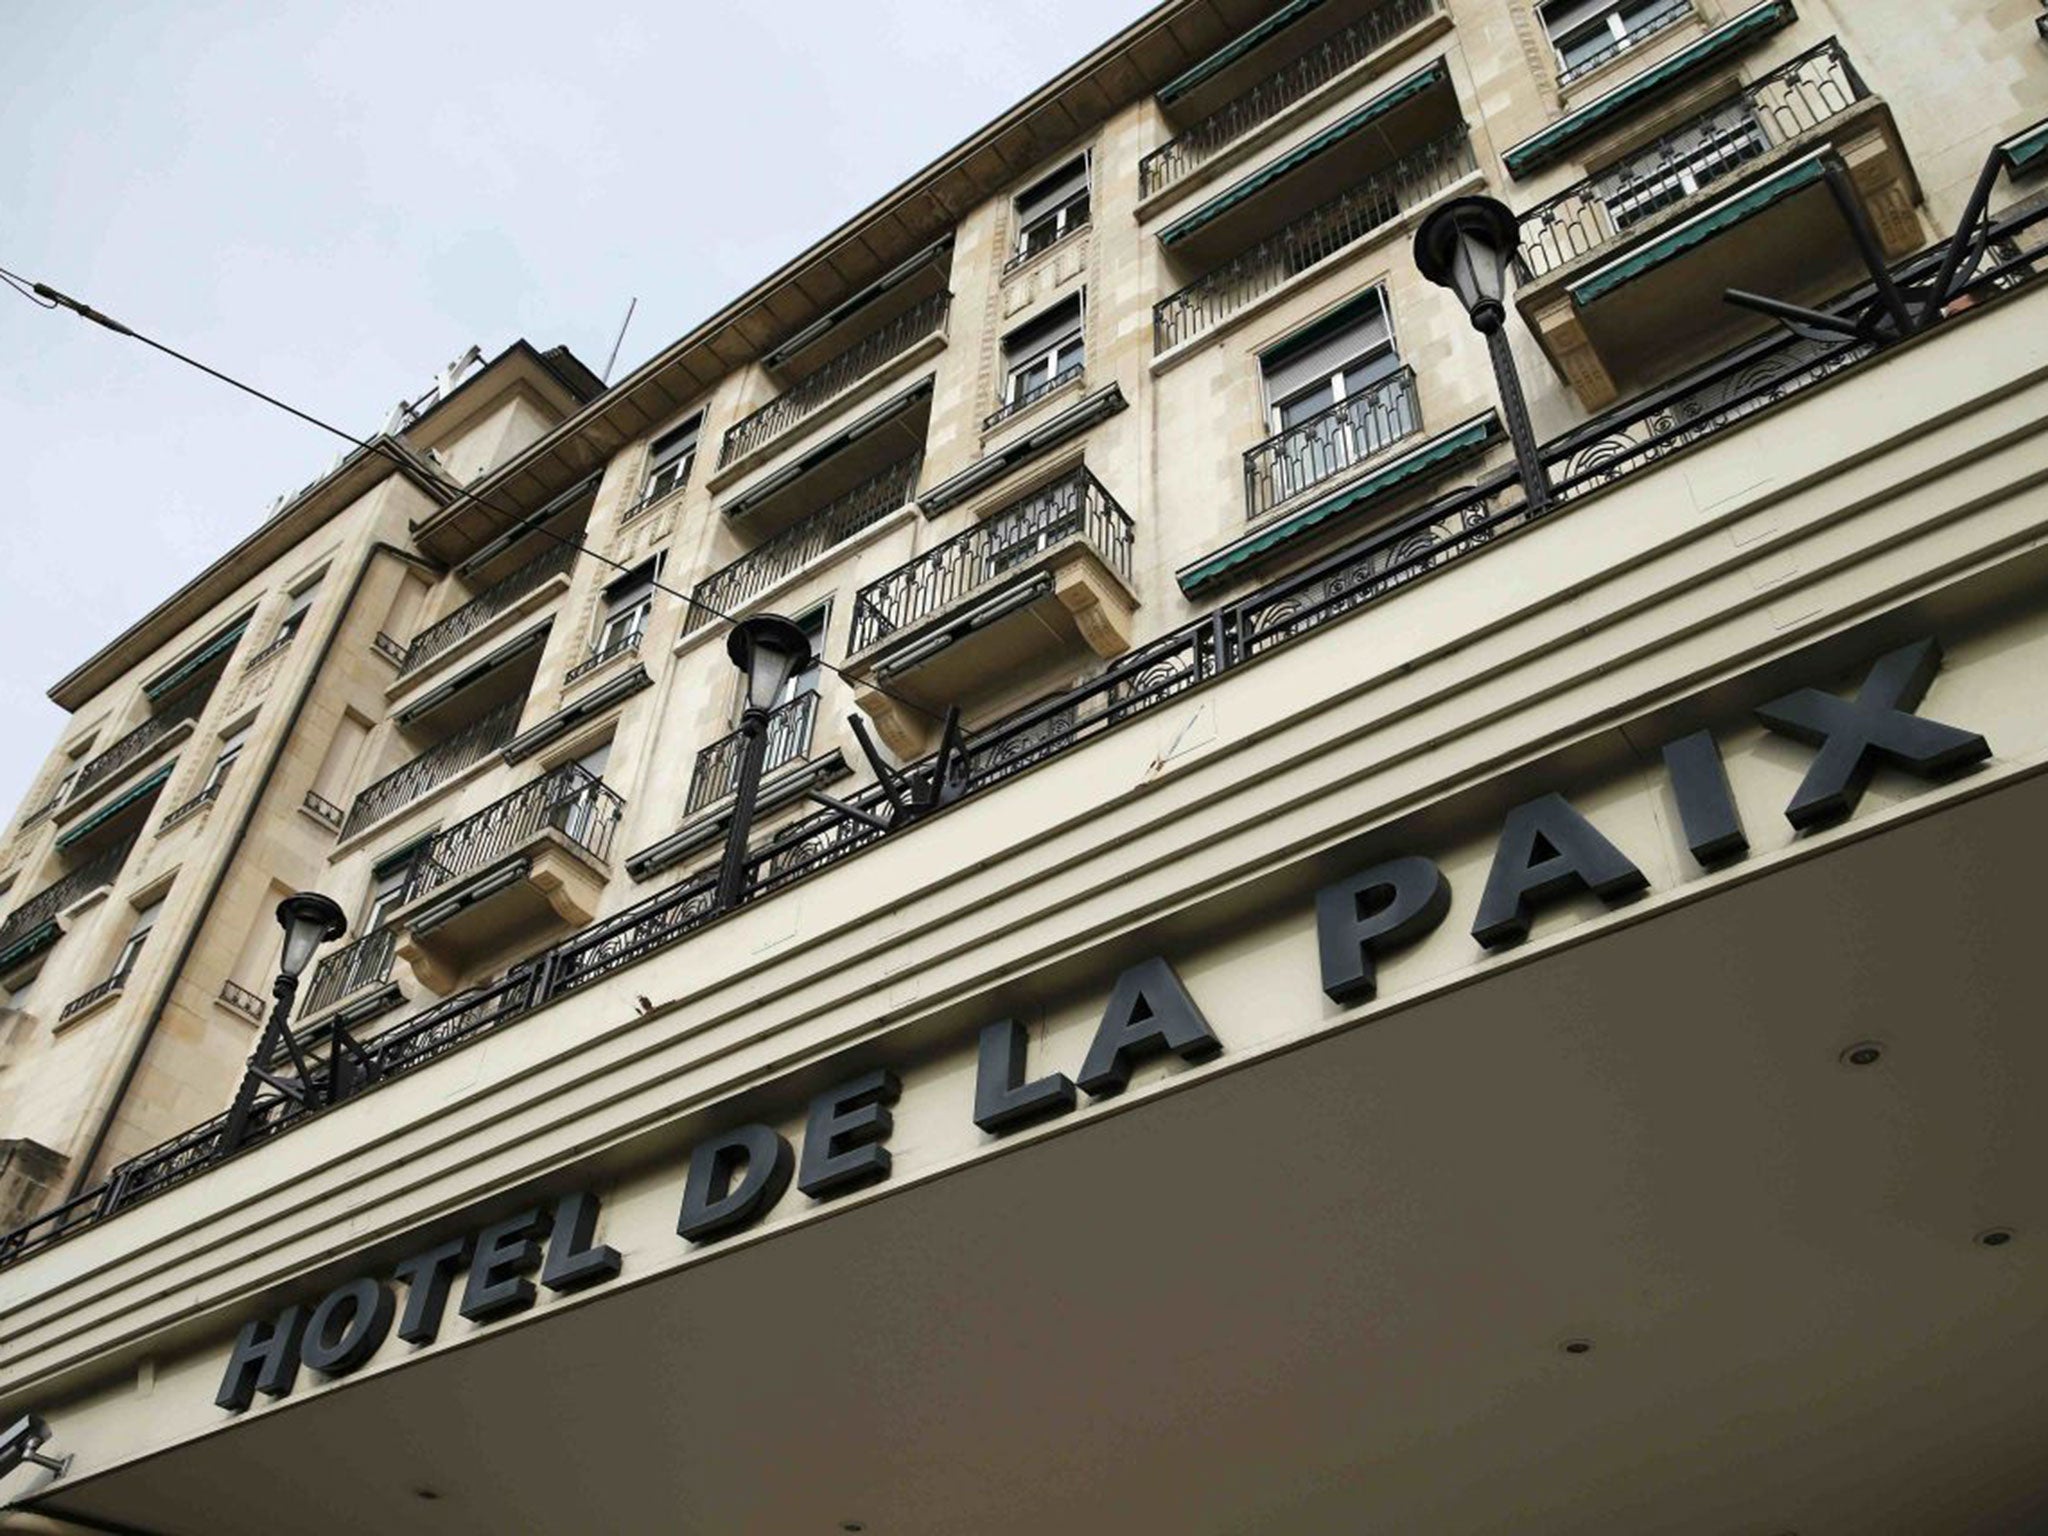 The Hotel de la Paix ('hotel of peace') in Lausanne, Switzerland, where Syrian opposition leaders have been holding talks